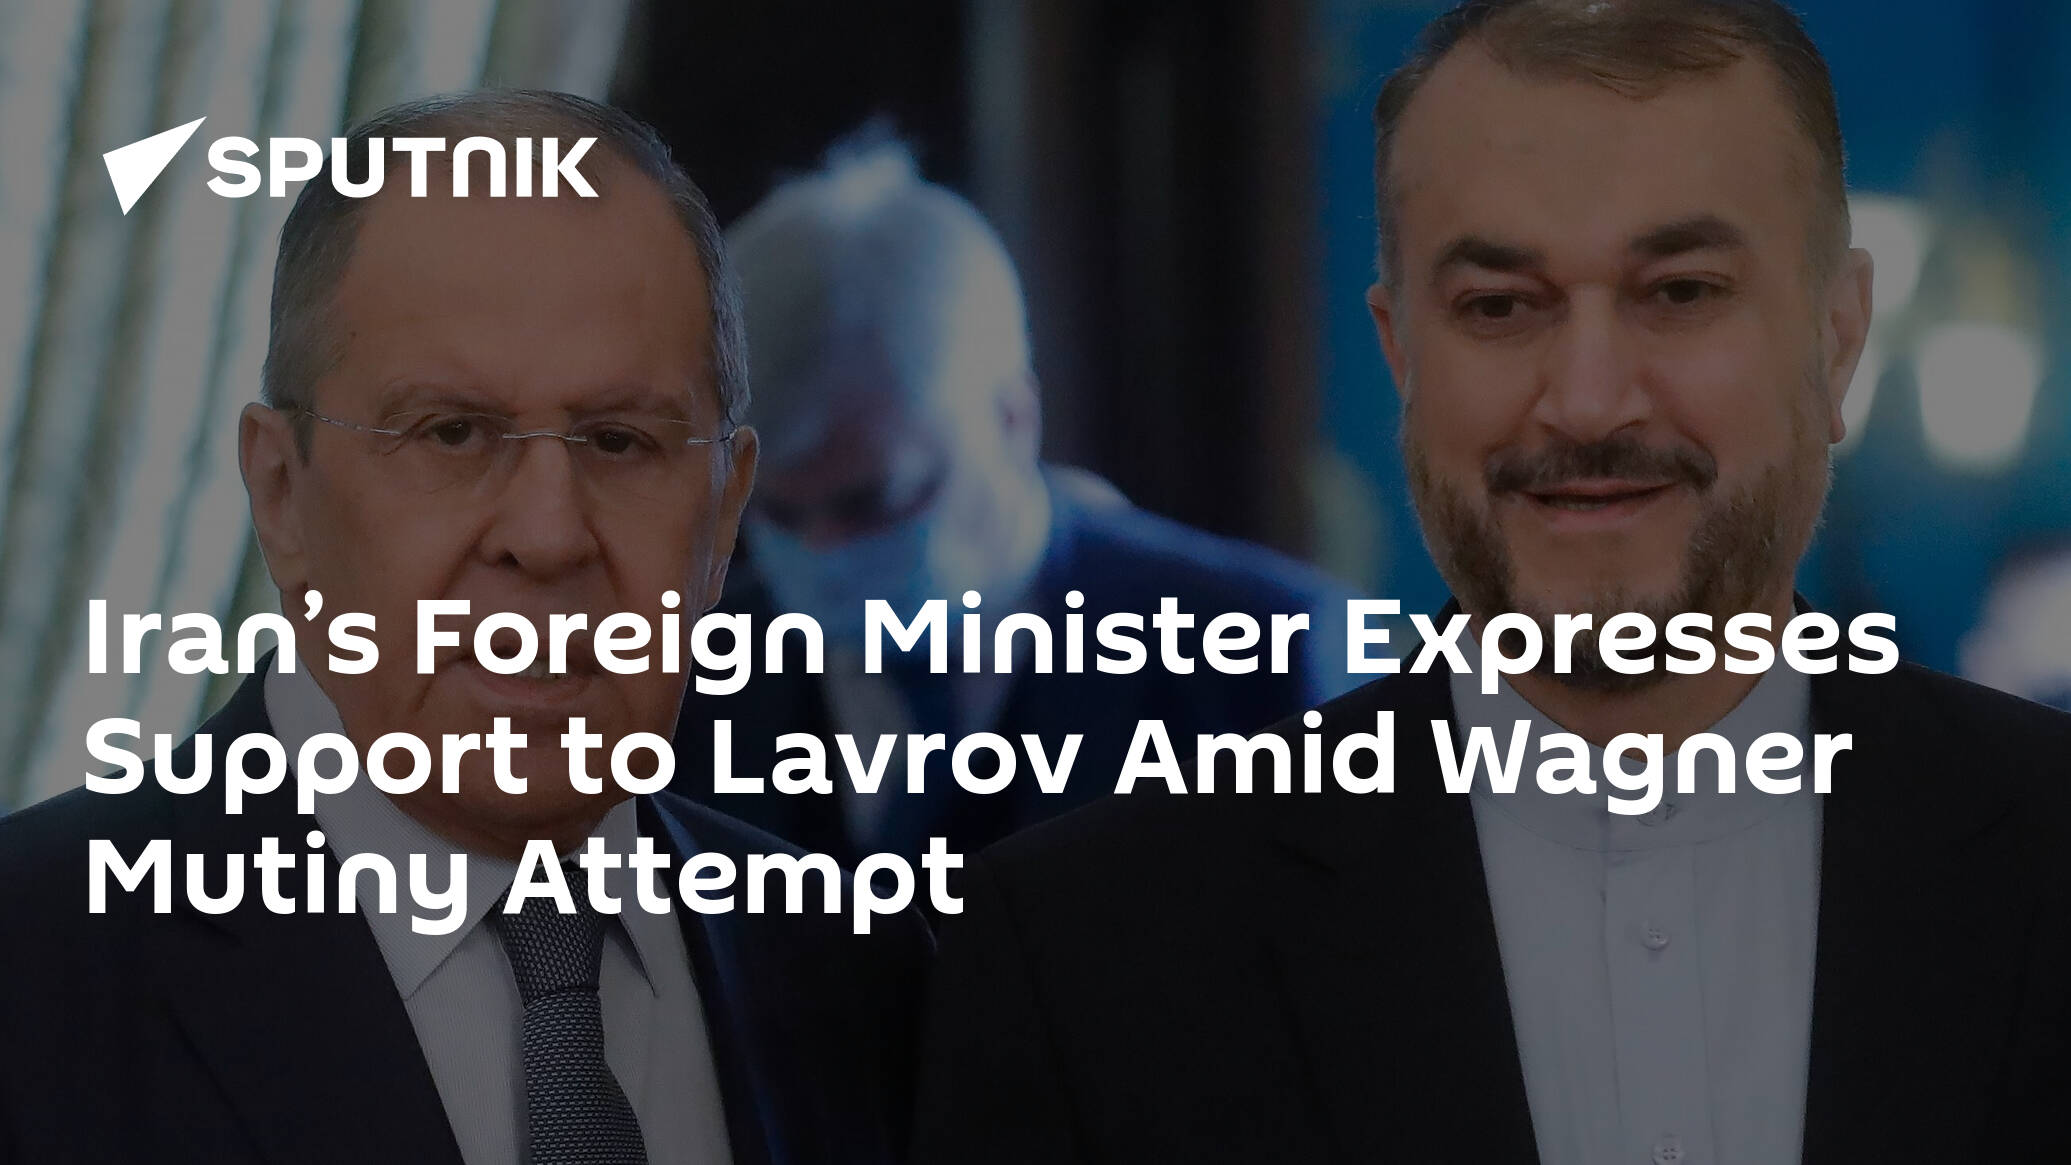 Iran’s Foreign Minister Expresses Support to Lavrov Amid Wagner Mutiny Attempt